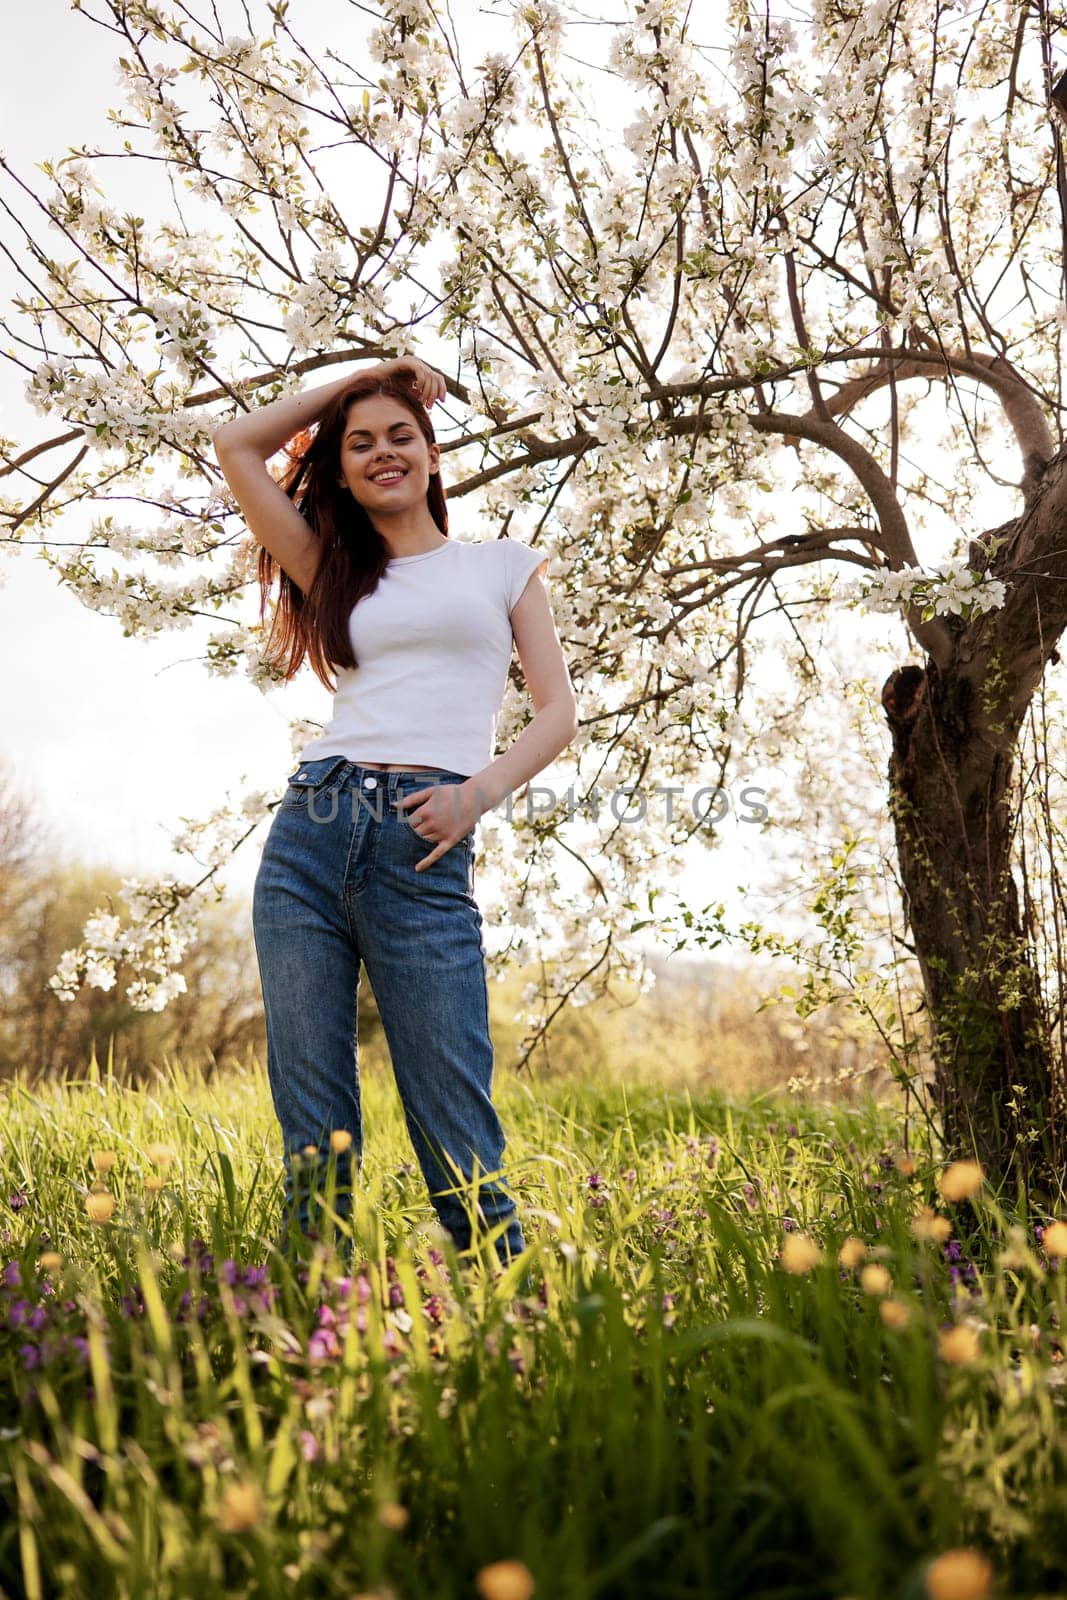 joyful, happy woman in jeans and a light T-shirt posing against the backdrop of a flowering tree by Vichizh